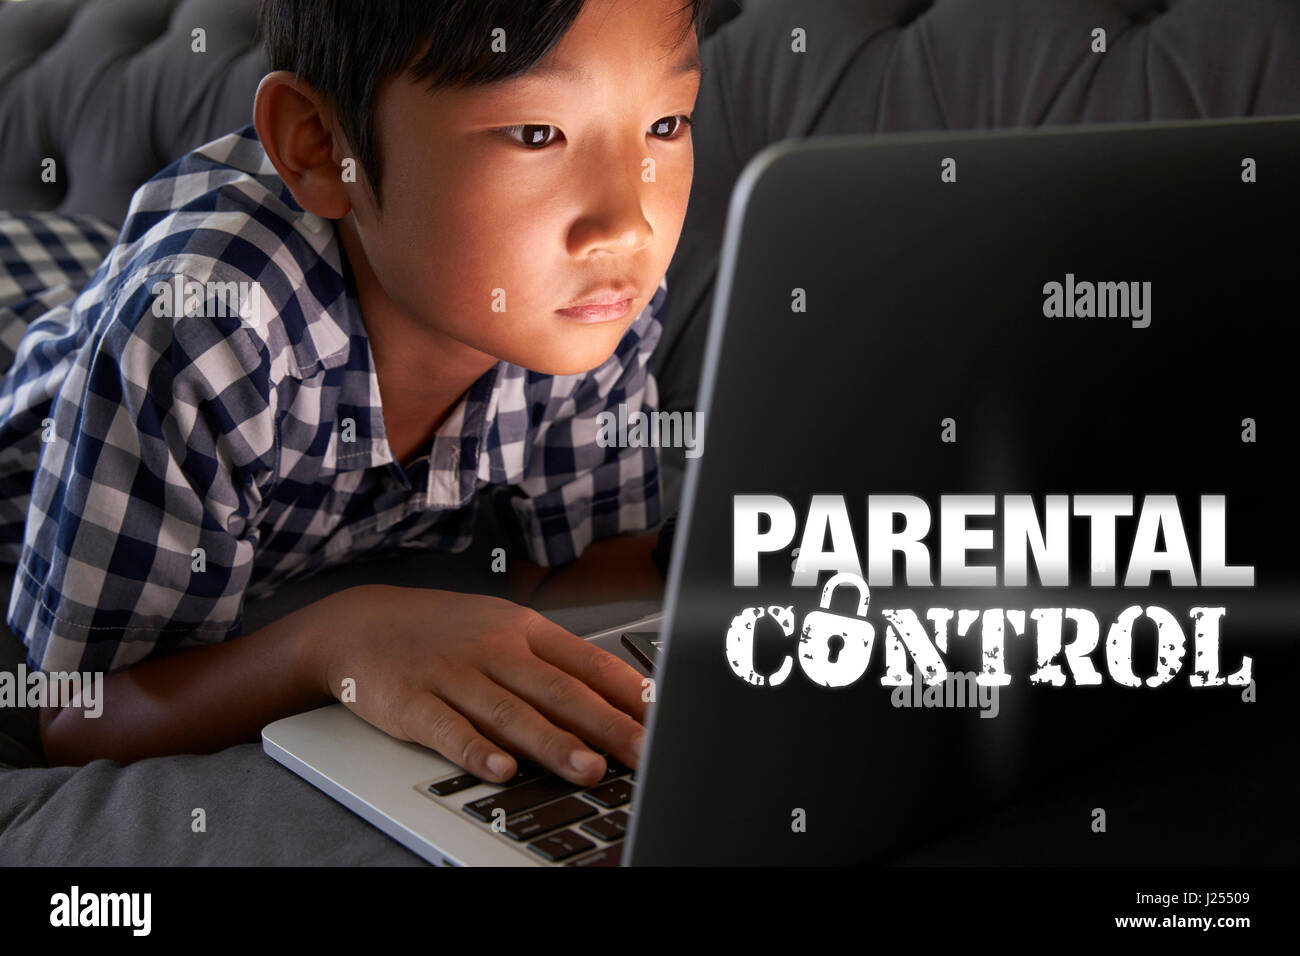 Boy Using Laptop with Parental Control Message Stock Photo